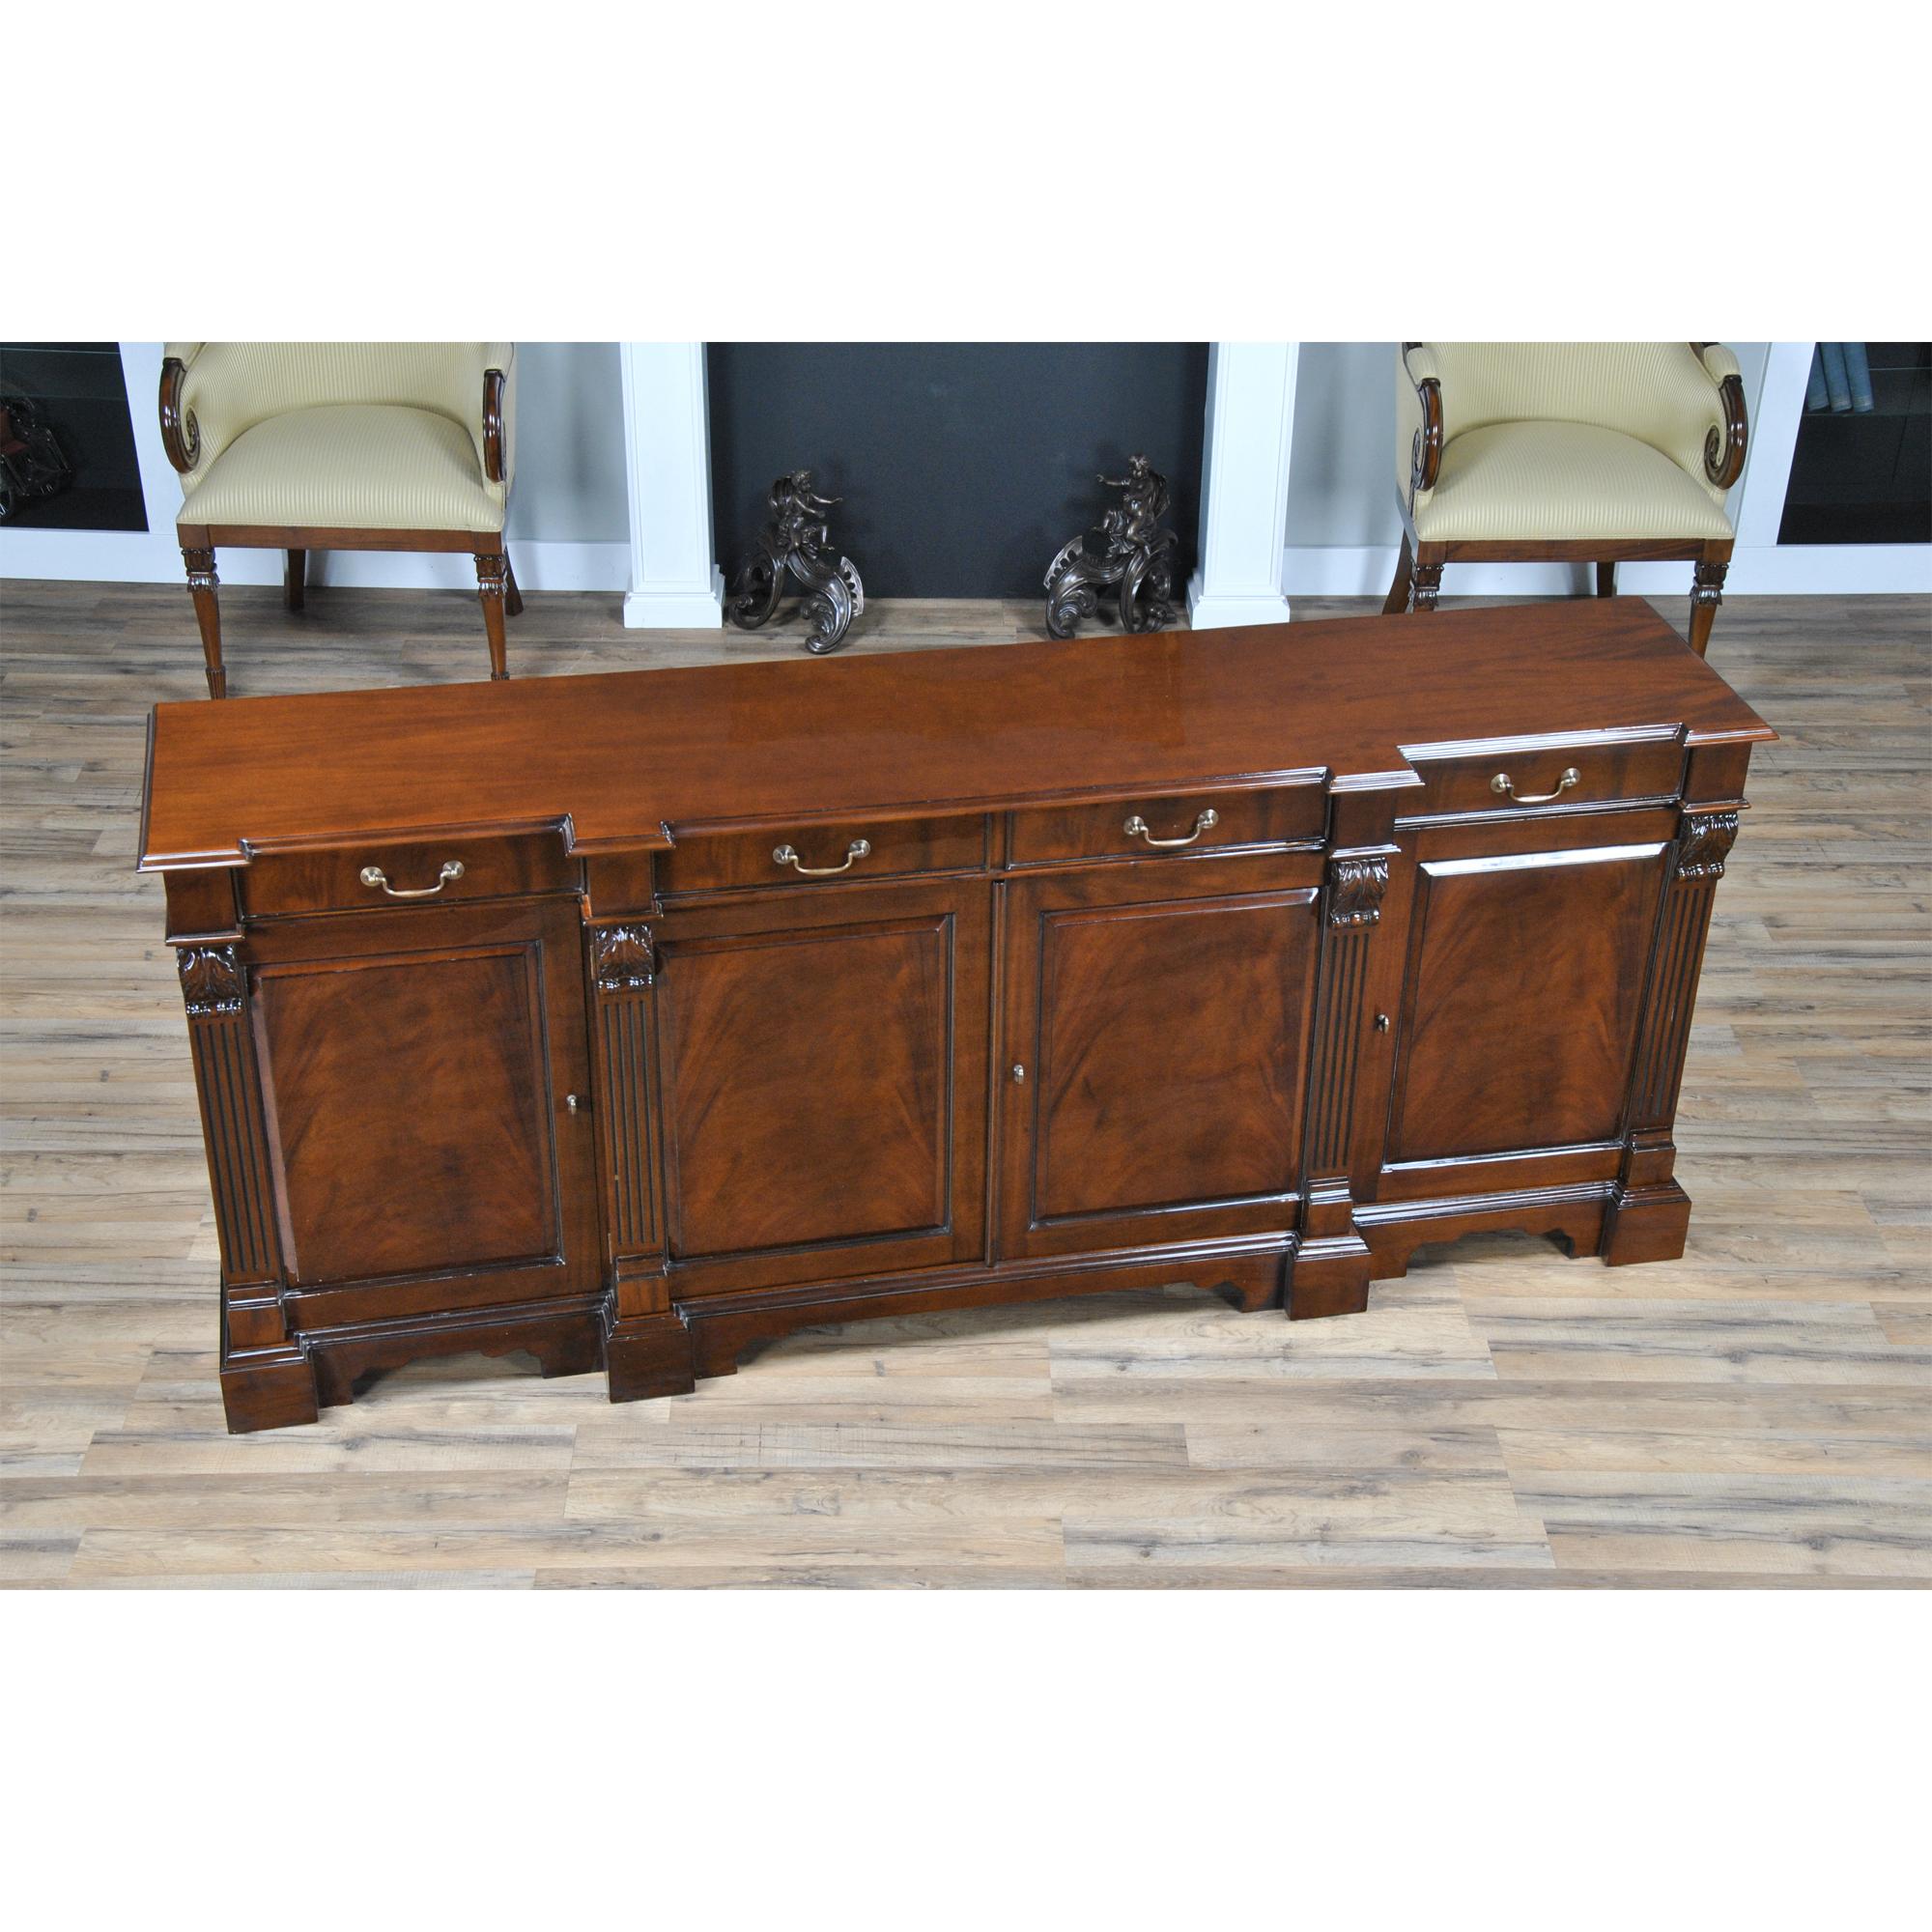 The Penhurst Mahogany Sideboard is a great addition to the dining room or office. A matching china closet and other associated pieces in the Penhurst family allow you to decorate an entire room in this style. The Penhurst Mahogany Sideboard features